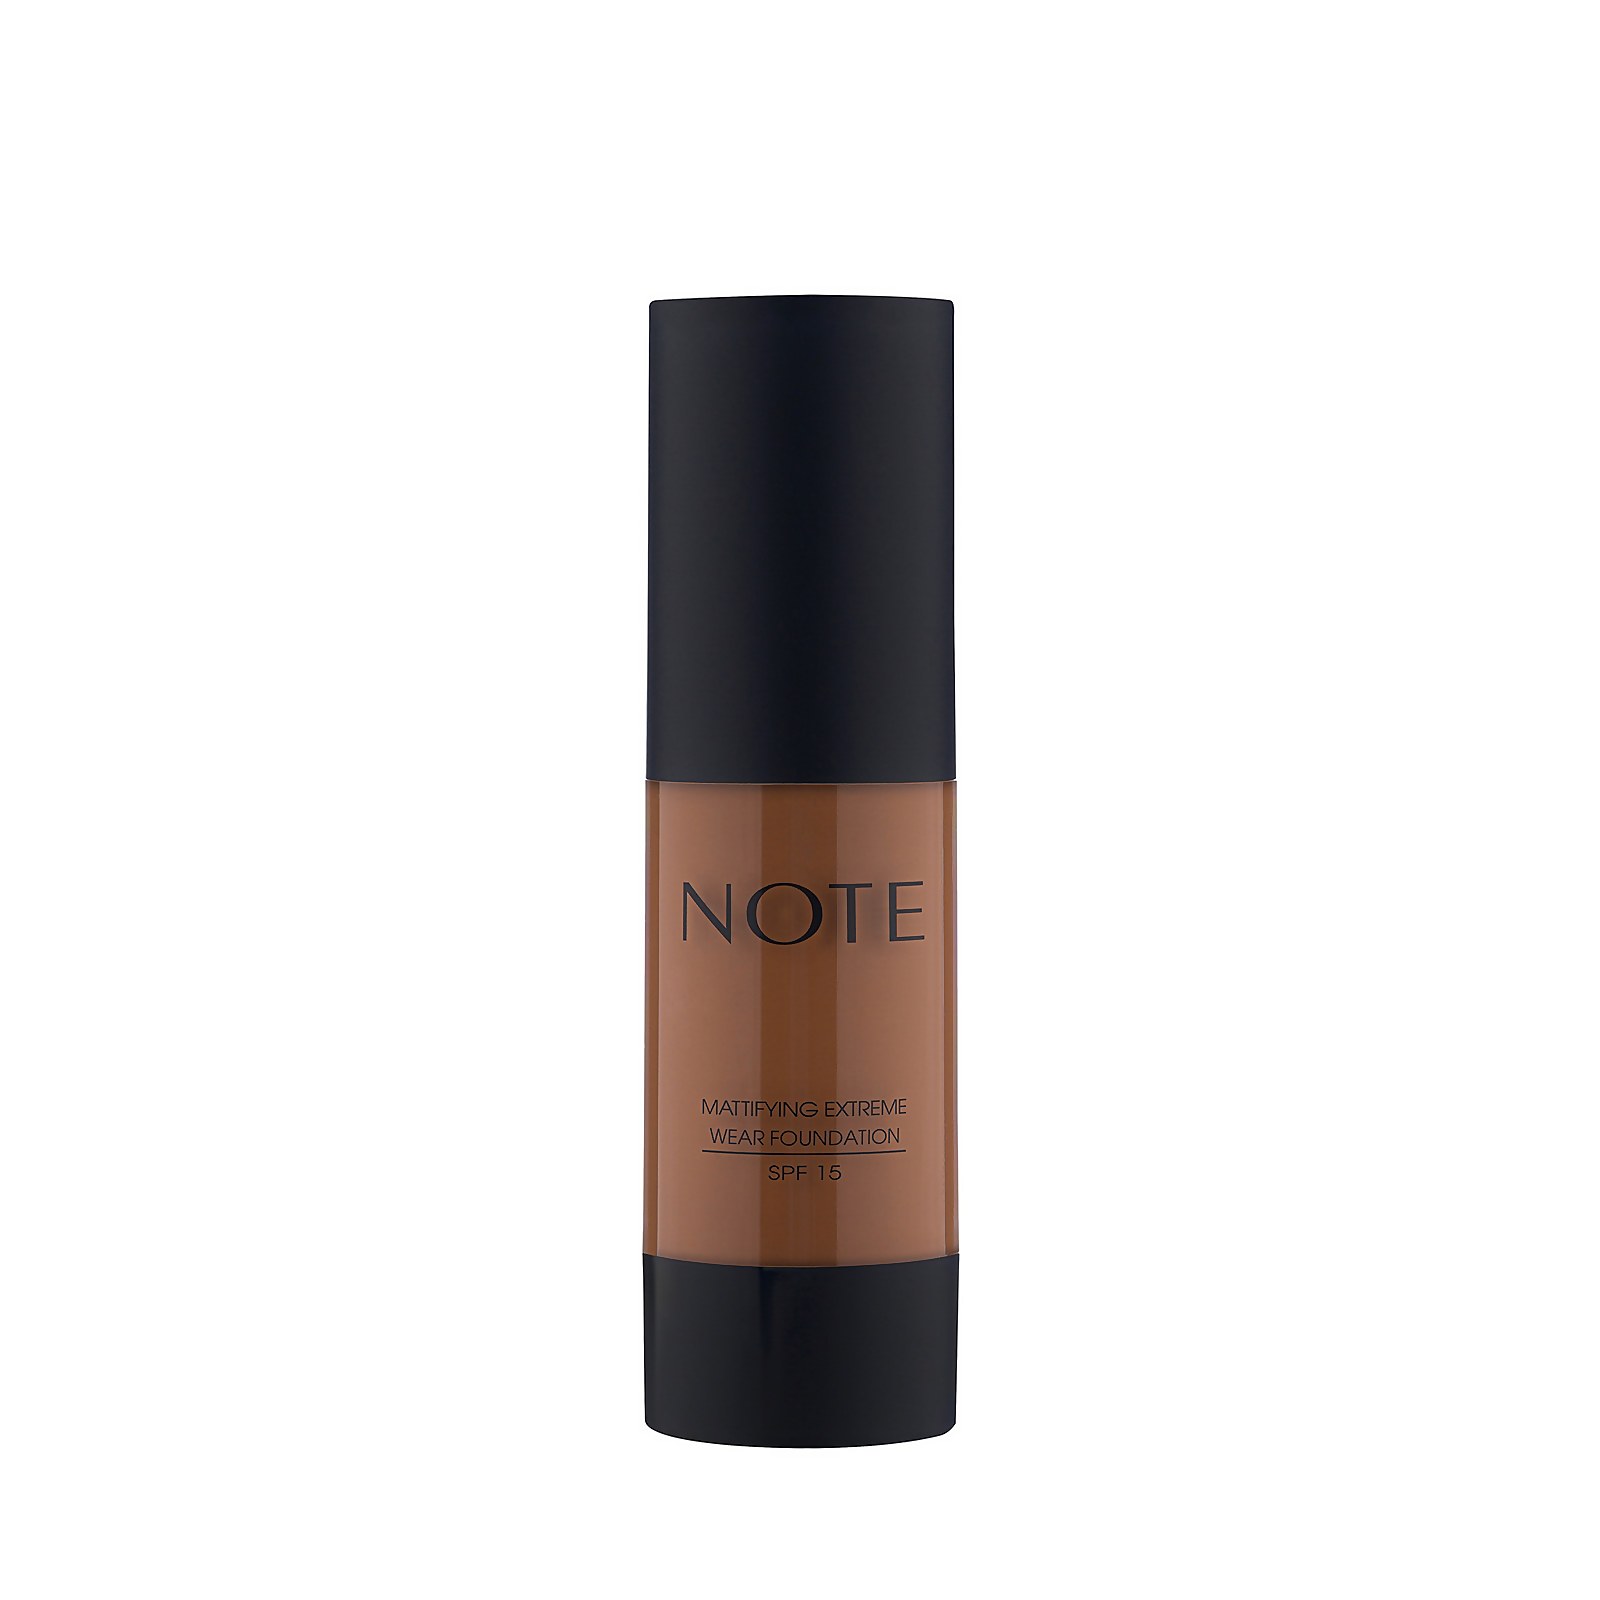 Image of Note Cosmetics Mattifying Extreme Wear Foundation 35ml (Various Shades) - 109 Chocolate